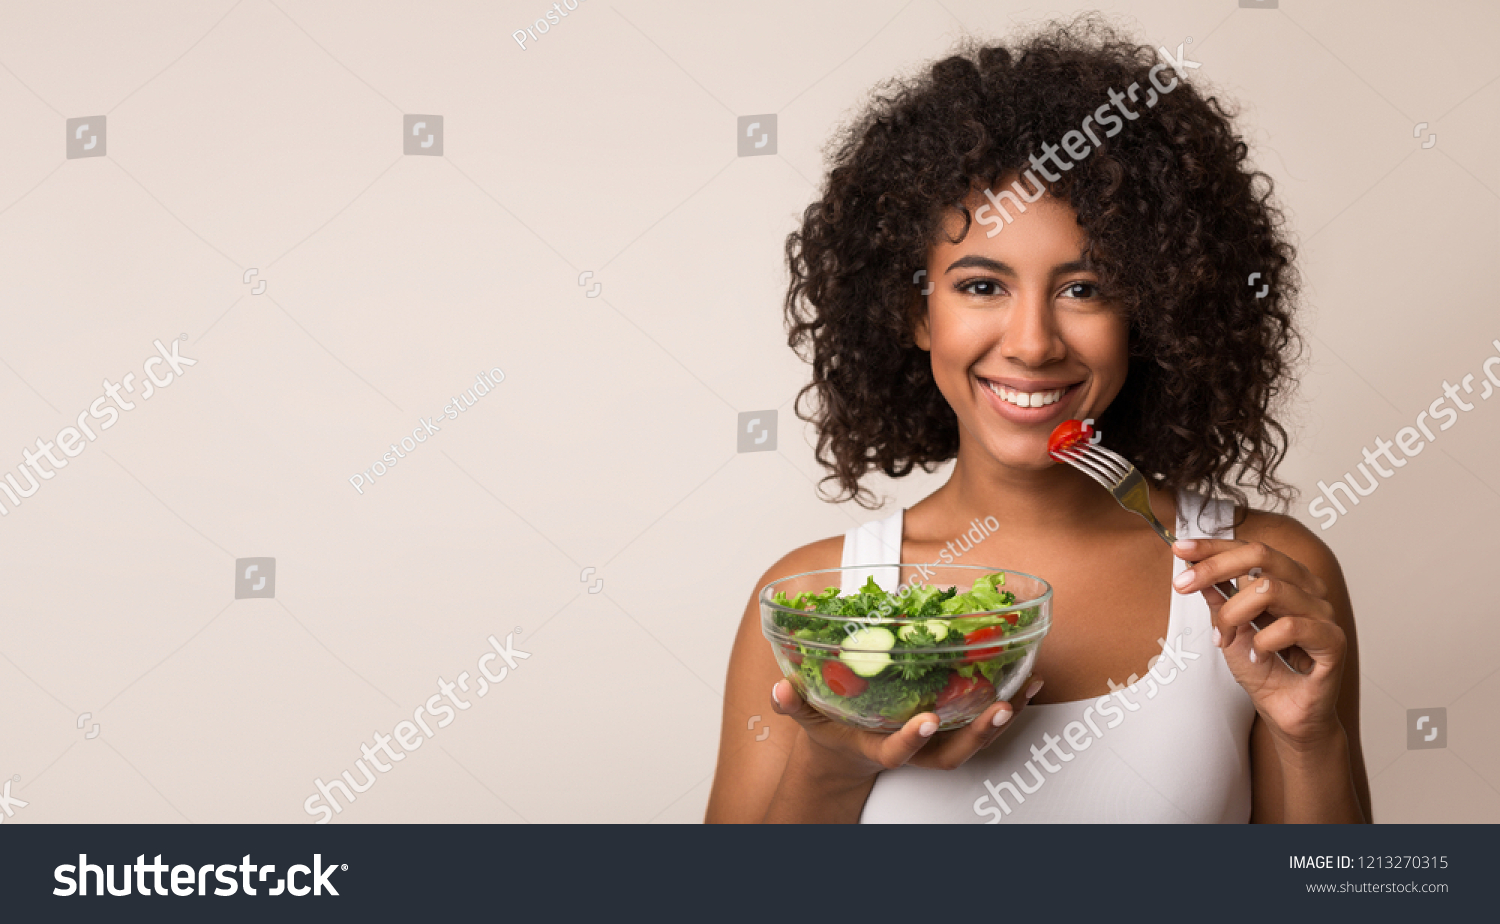 African-american woman eating vegetable salad over light background with copy space #1213270315